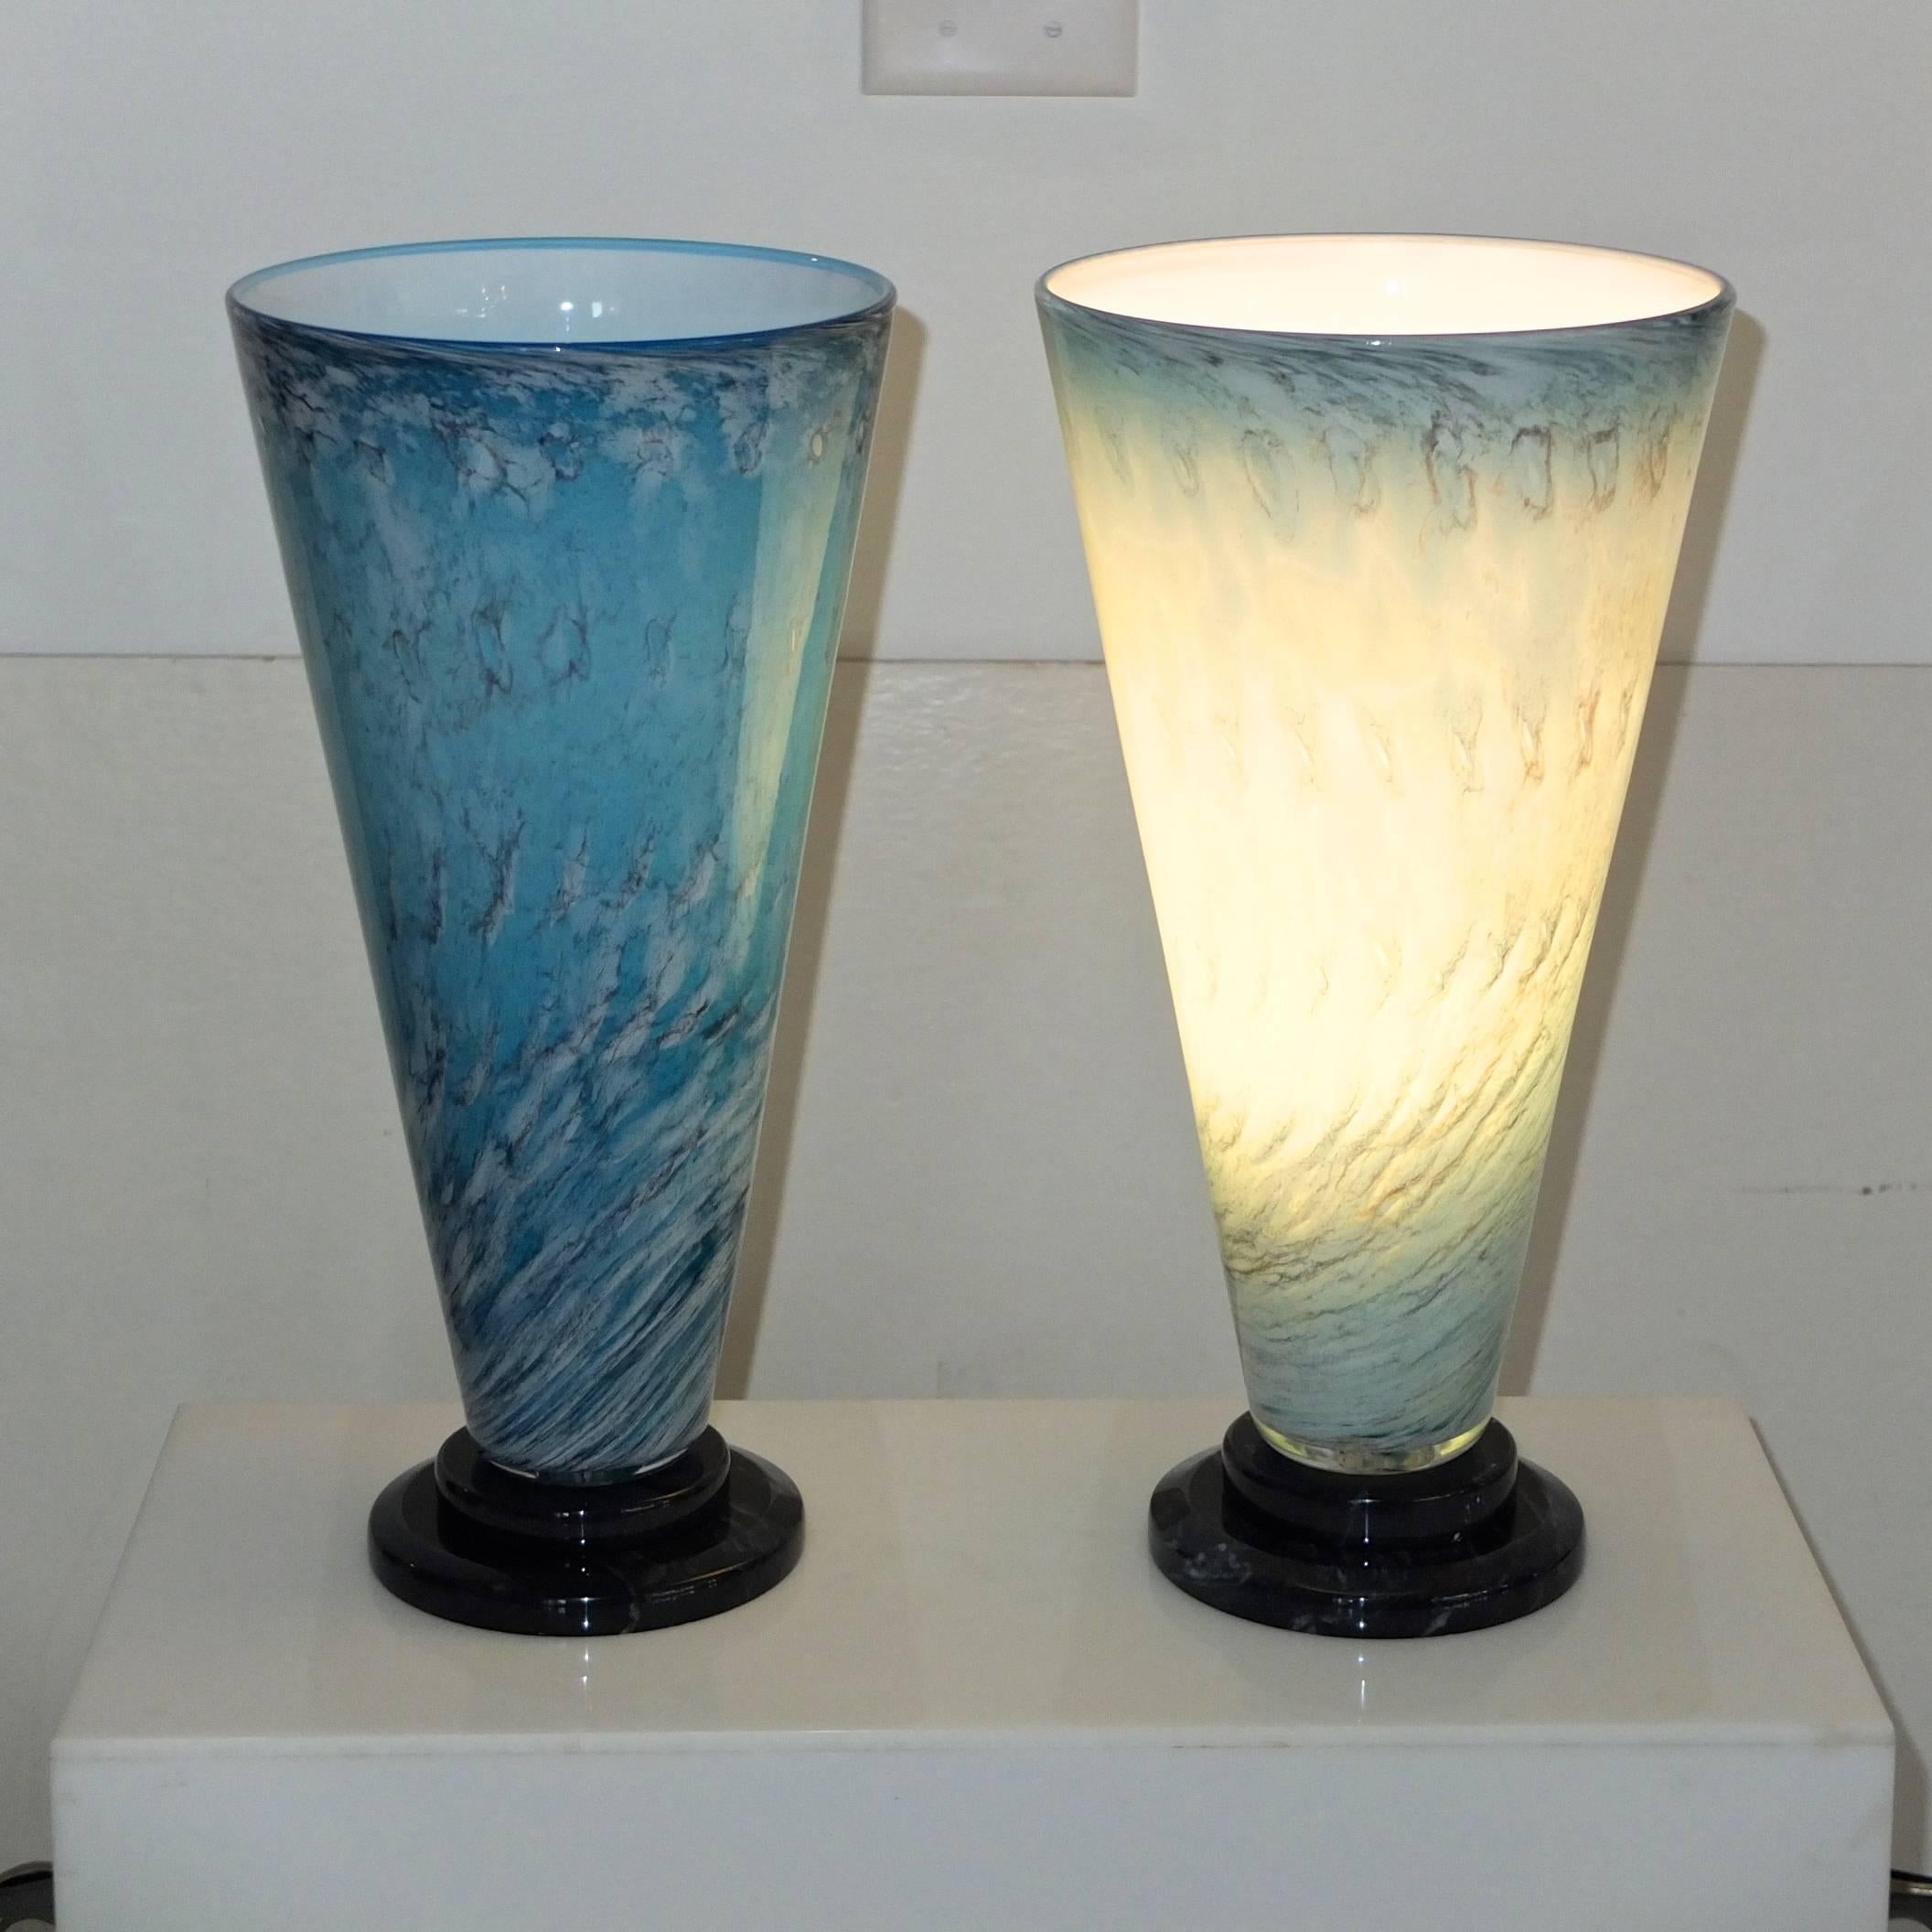 Large-scale handblown conical form art glass lamps on round black stepped marble bases made by Glass Light Studio, signed 1989. The V-lite has one socket for a standard dimmable bulb, up to 100 watts. An in-line dimmer switch (on the cord) varies